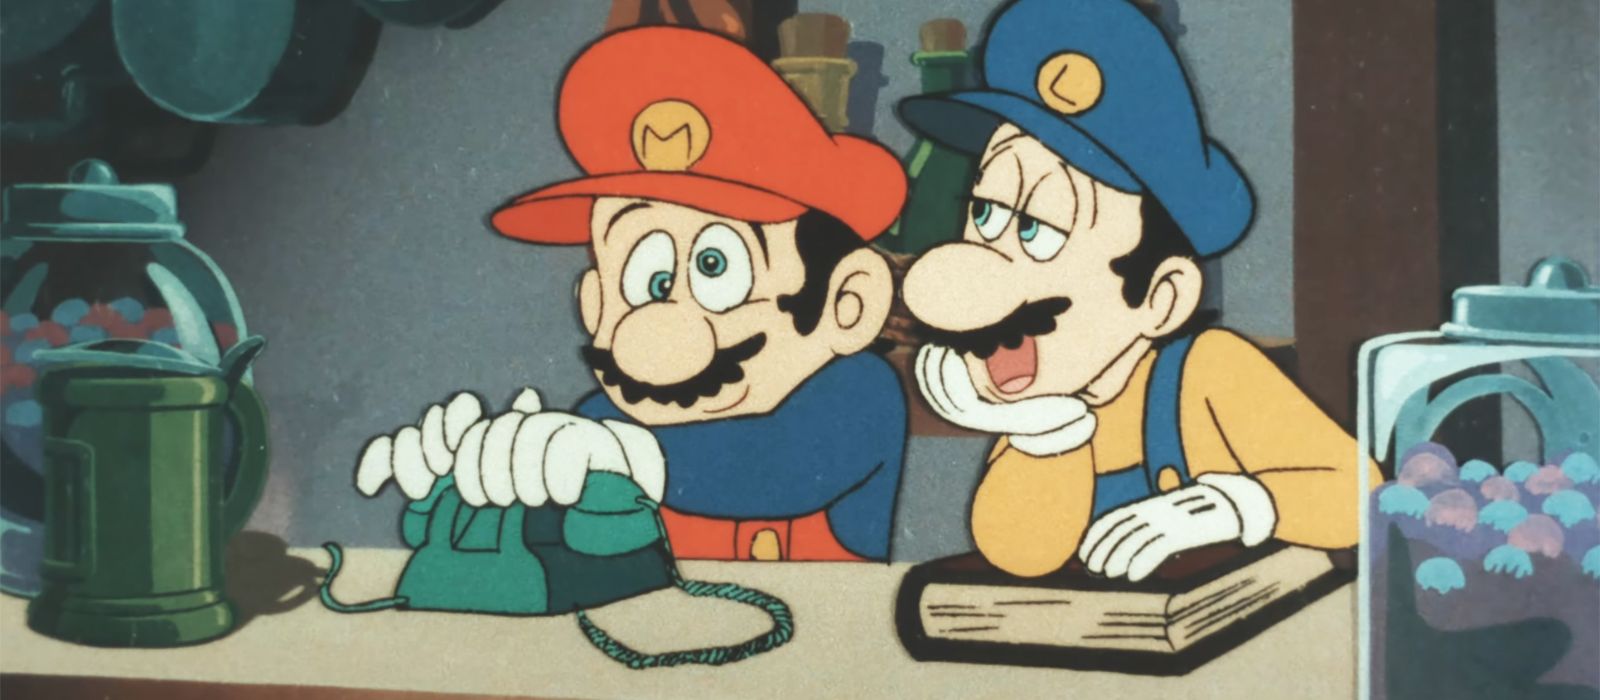 Fan shows the remaster of a very old anime about Mario, for which he spent several years and $20 thousand